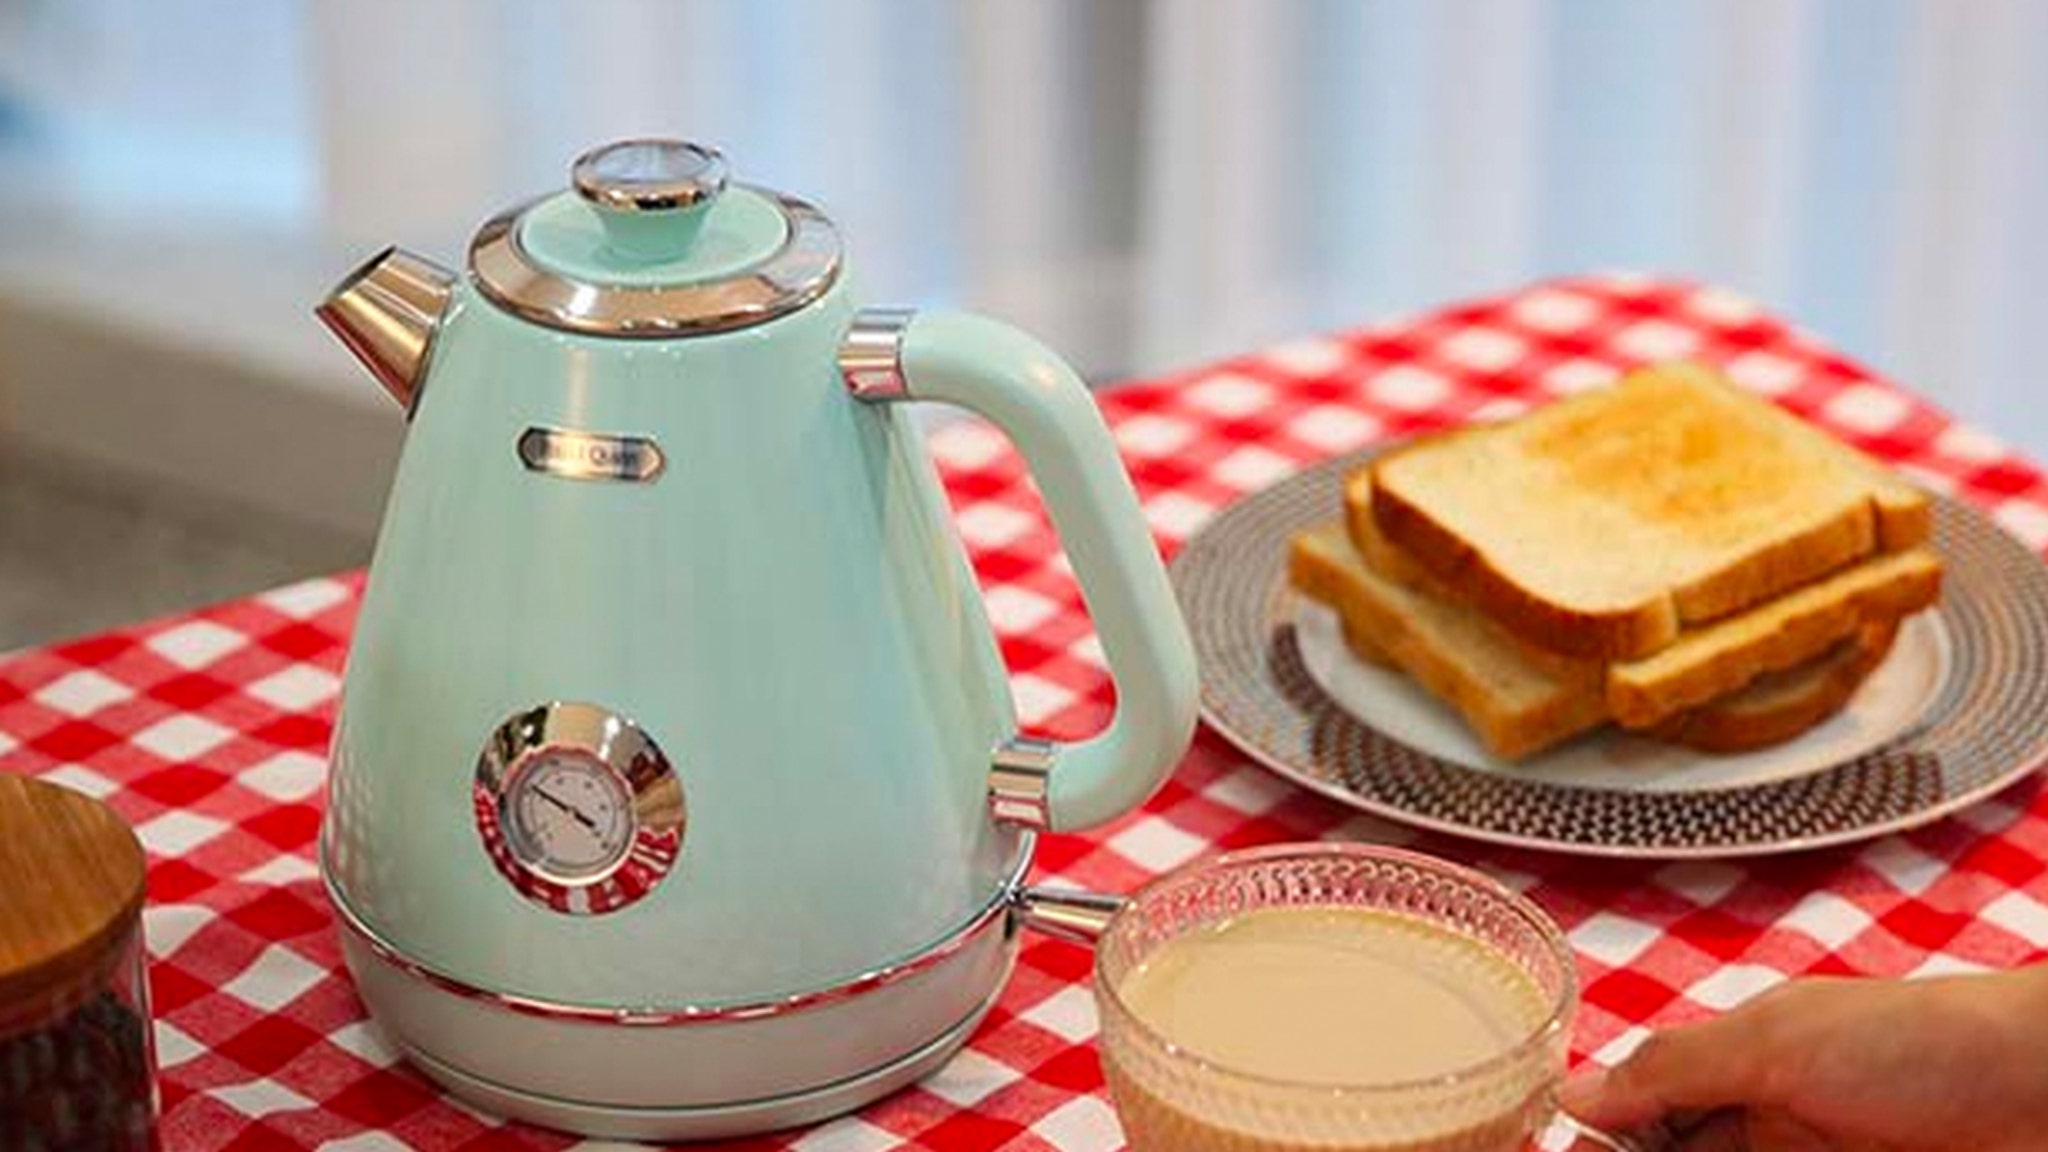 This Retro Tea Kettle Is $20 Off and Will Look So Cool On Your